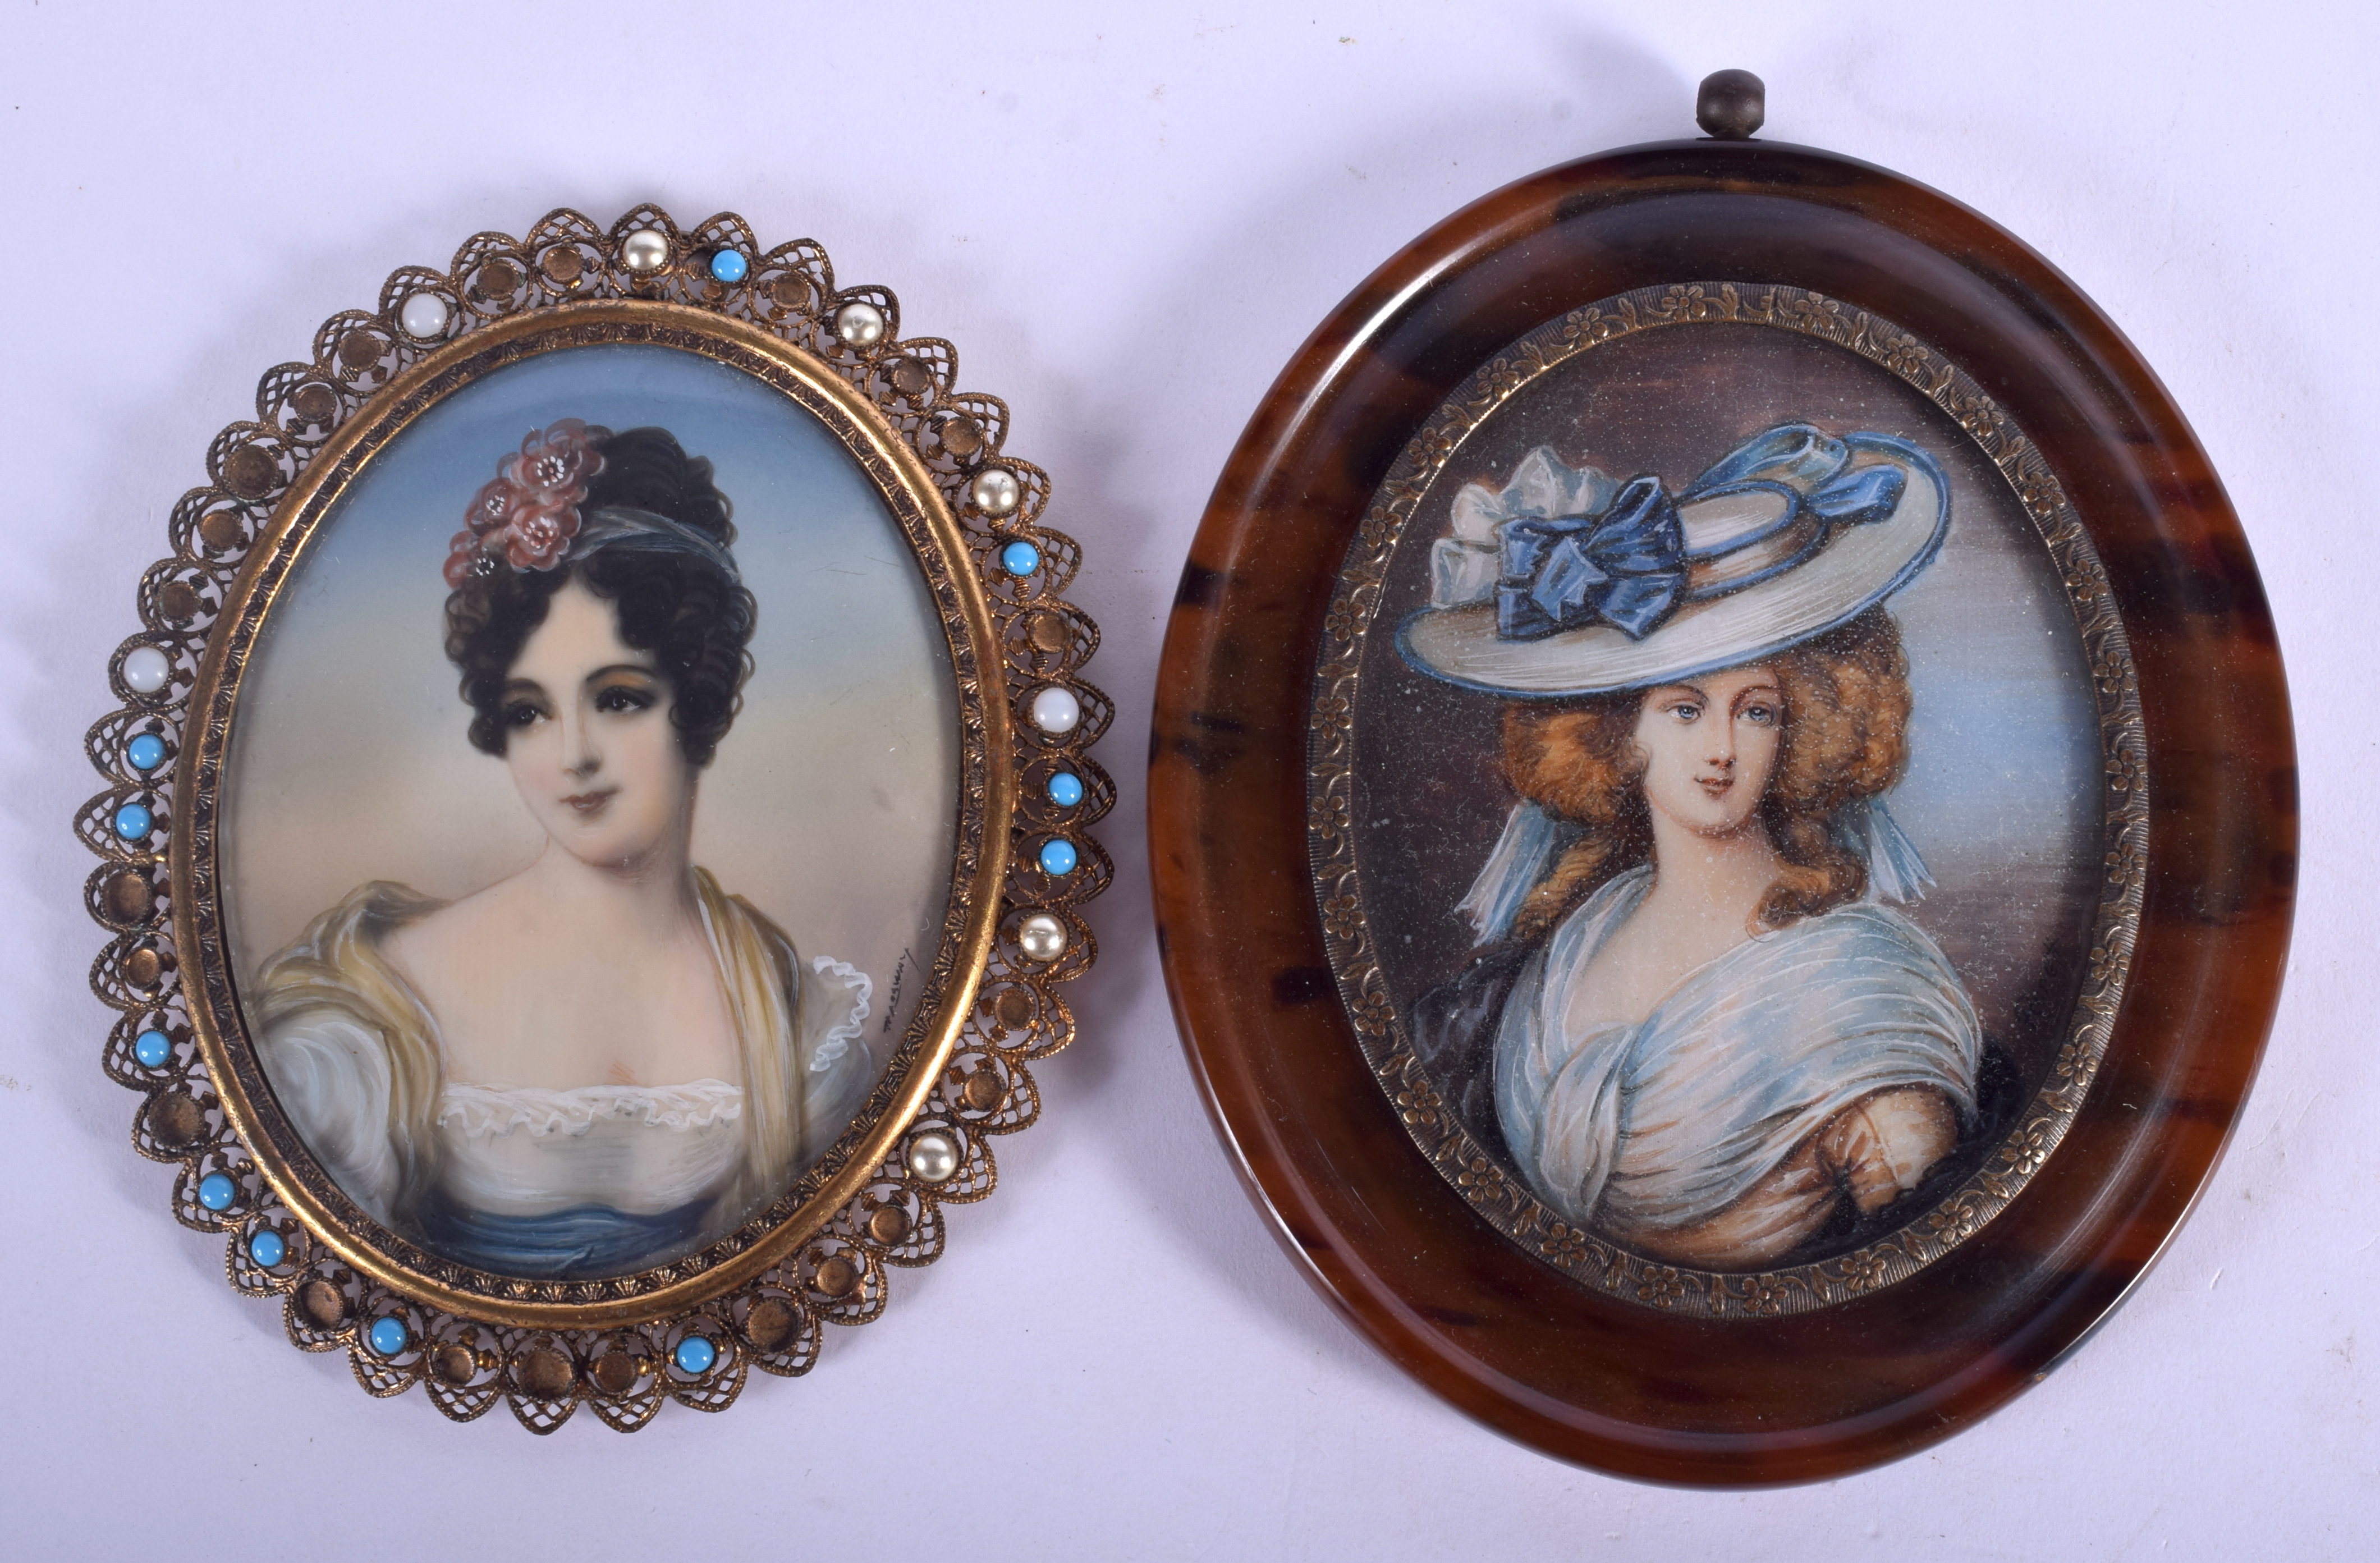 TWO EARLY 20TH CENTURY CONTINENTAL PAINTED IVORY PORTRAIT MINIATURES. Largest image 6 cm x 8.5 cm. (